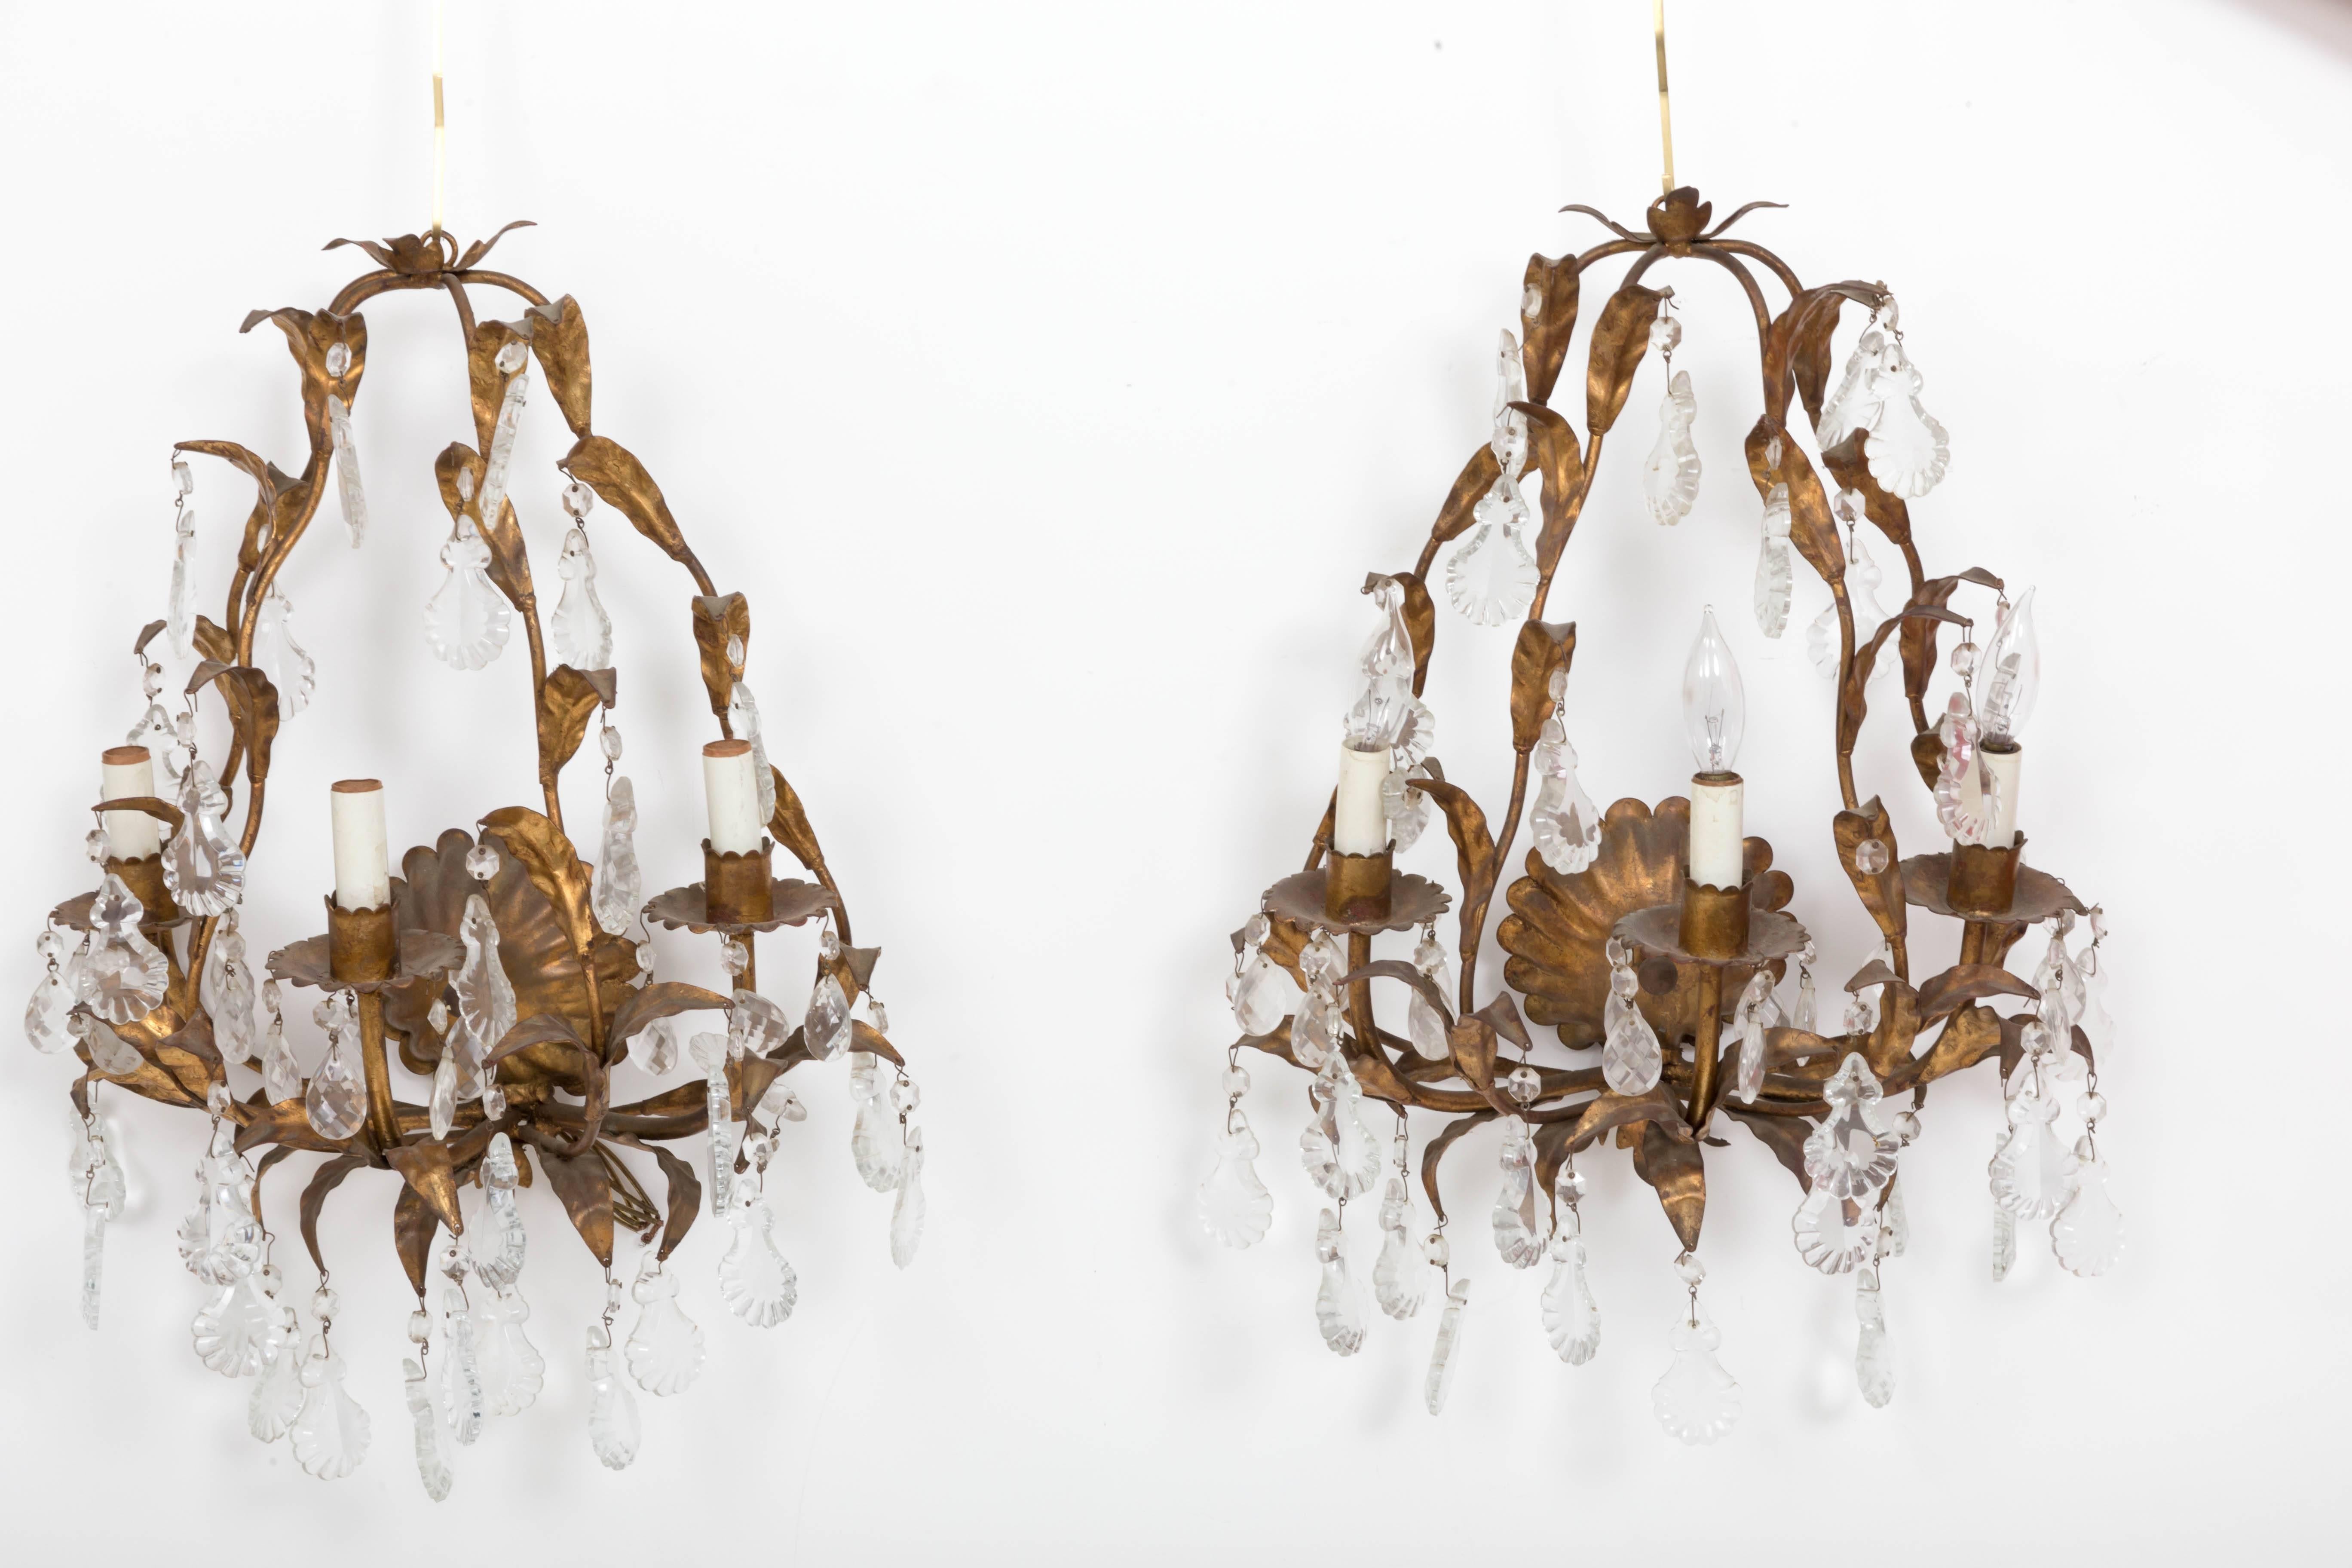 Gilded brass leaf shape scrolled sconces with scallop shape crystals and faceted teardrop crystals.